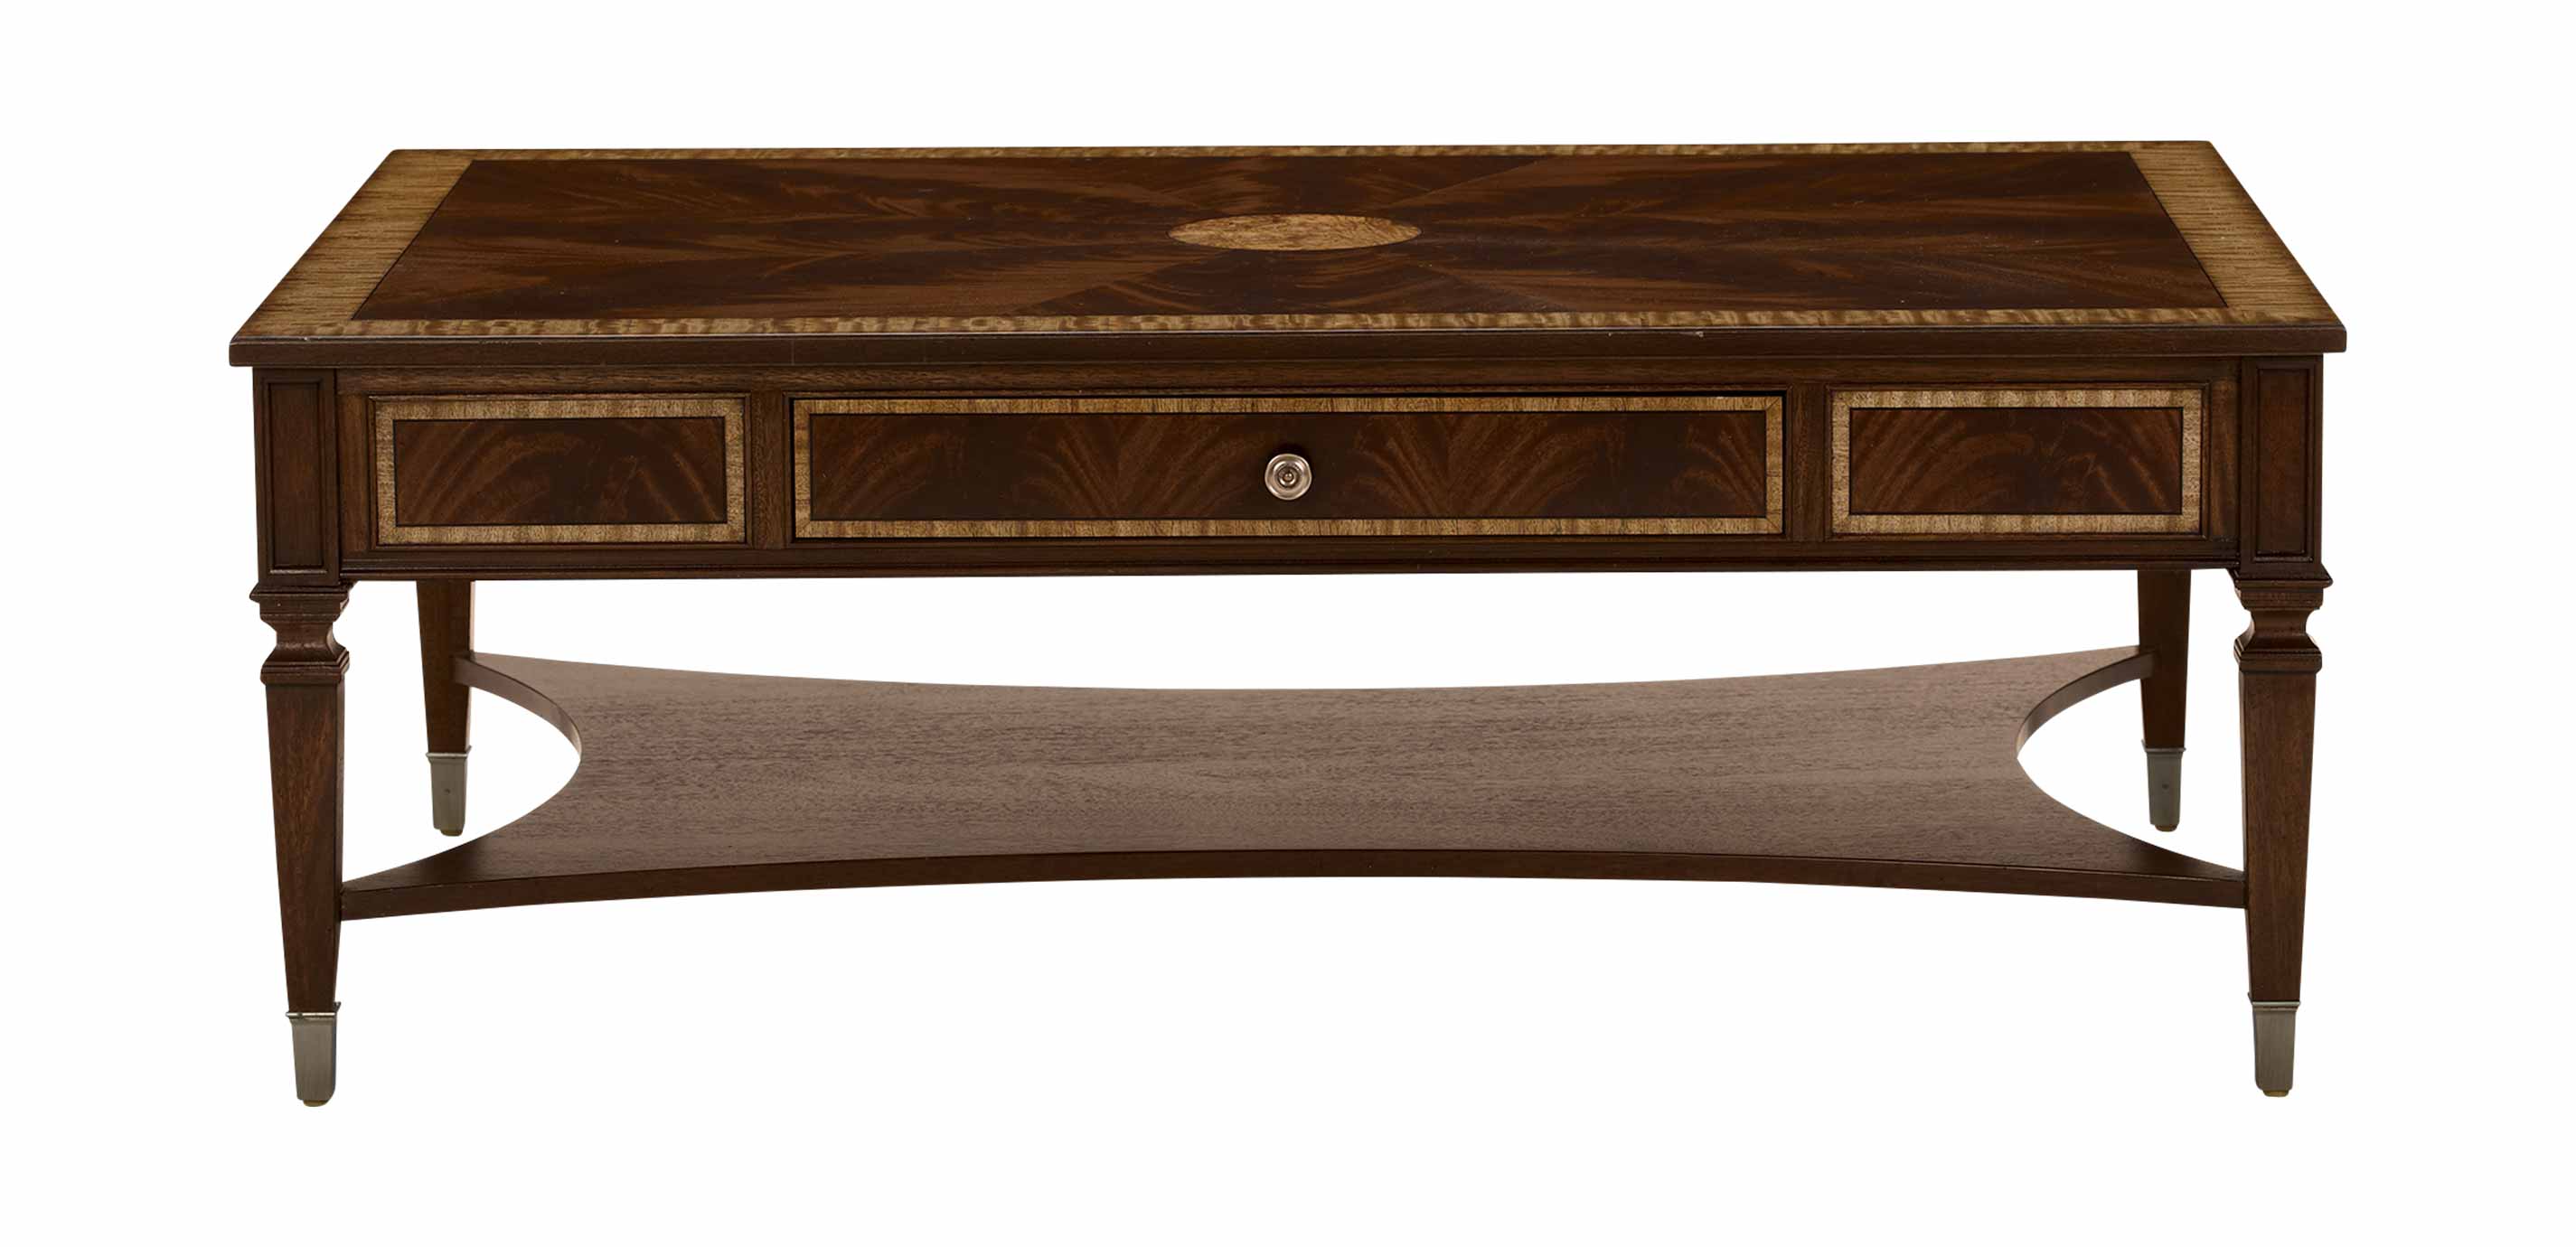 Lawton Mahogany Coffee Table Newport Collection Ethan Allen